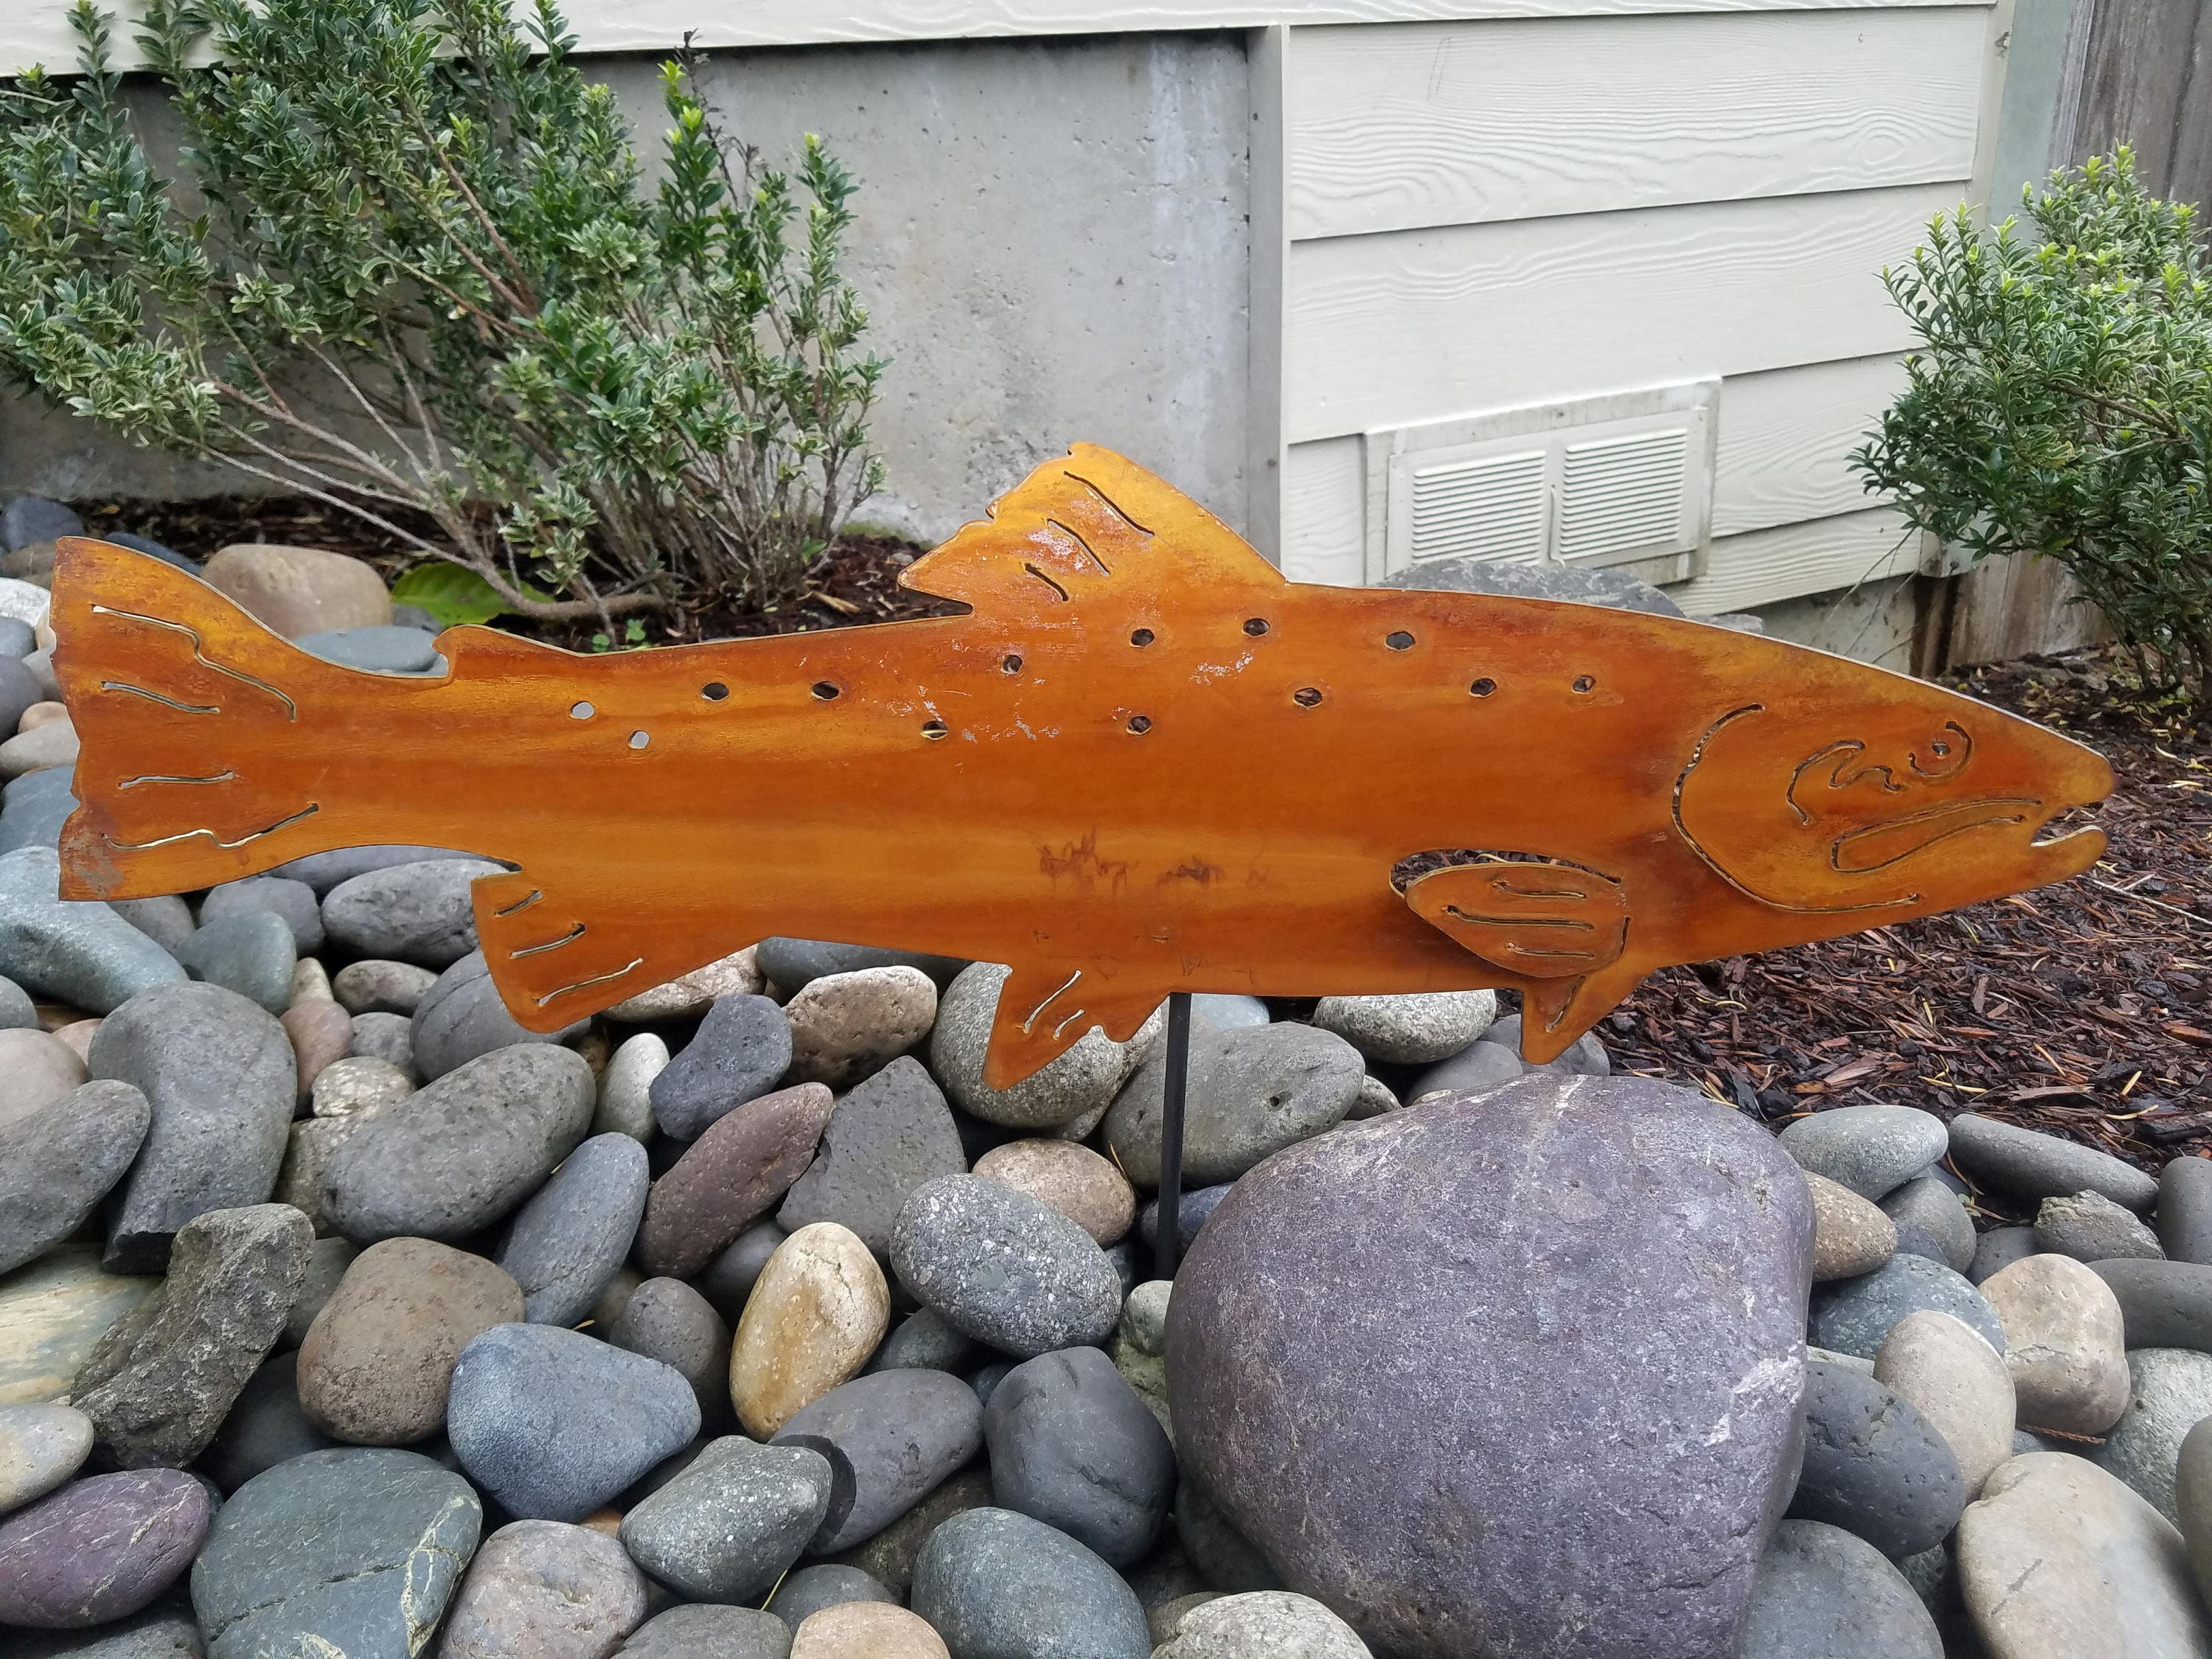 Rainbow trout 9 - Patio Furniture, Yard Art, and Whirlygigs - The Patriot  Woodworker